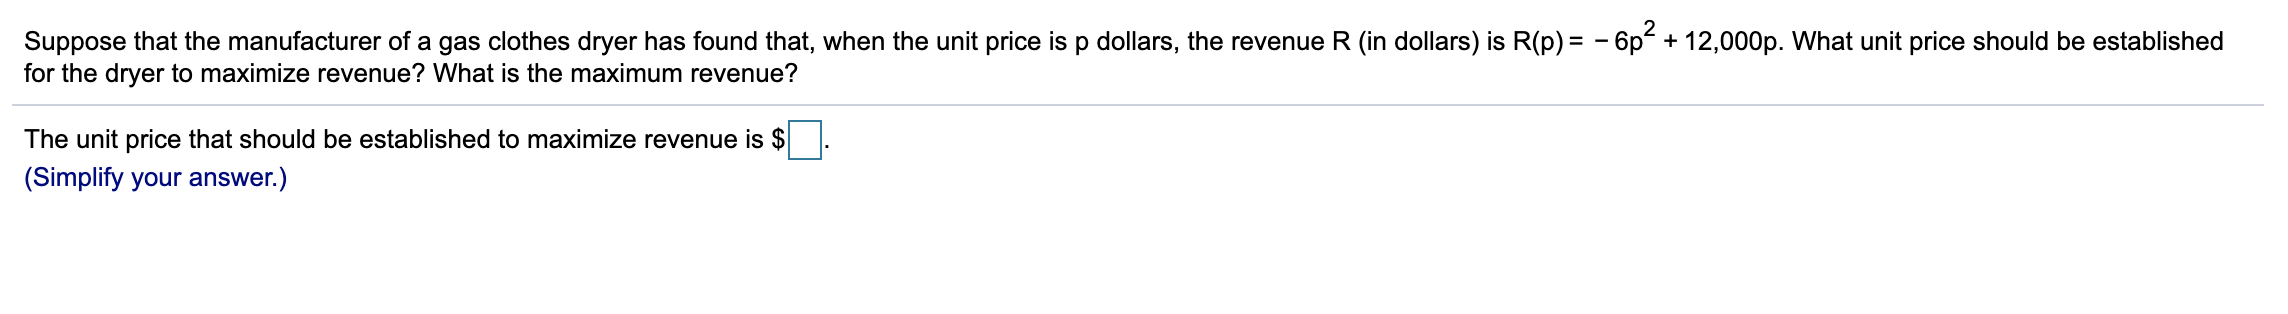 Suppose that the manufacturer of a gas clothes dryer has found that, when the unit price is p dollars, the revenue R (in dollars) is R(p) = - 6p² + 12,000p. What unit price should be established
for the dryer to maximize revenue? What is the maximum revenue?
The unit price that should be established to maximize revenue is $
(Simplify your answer.)
